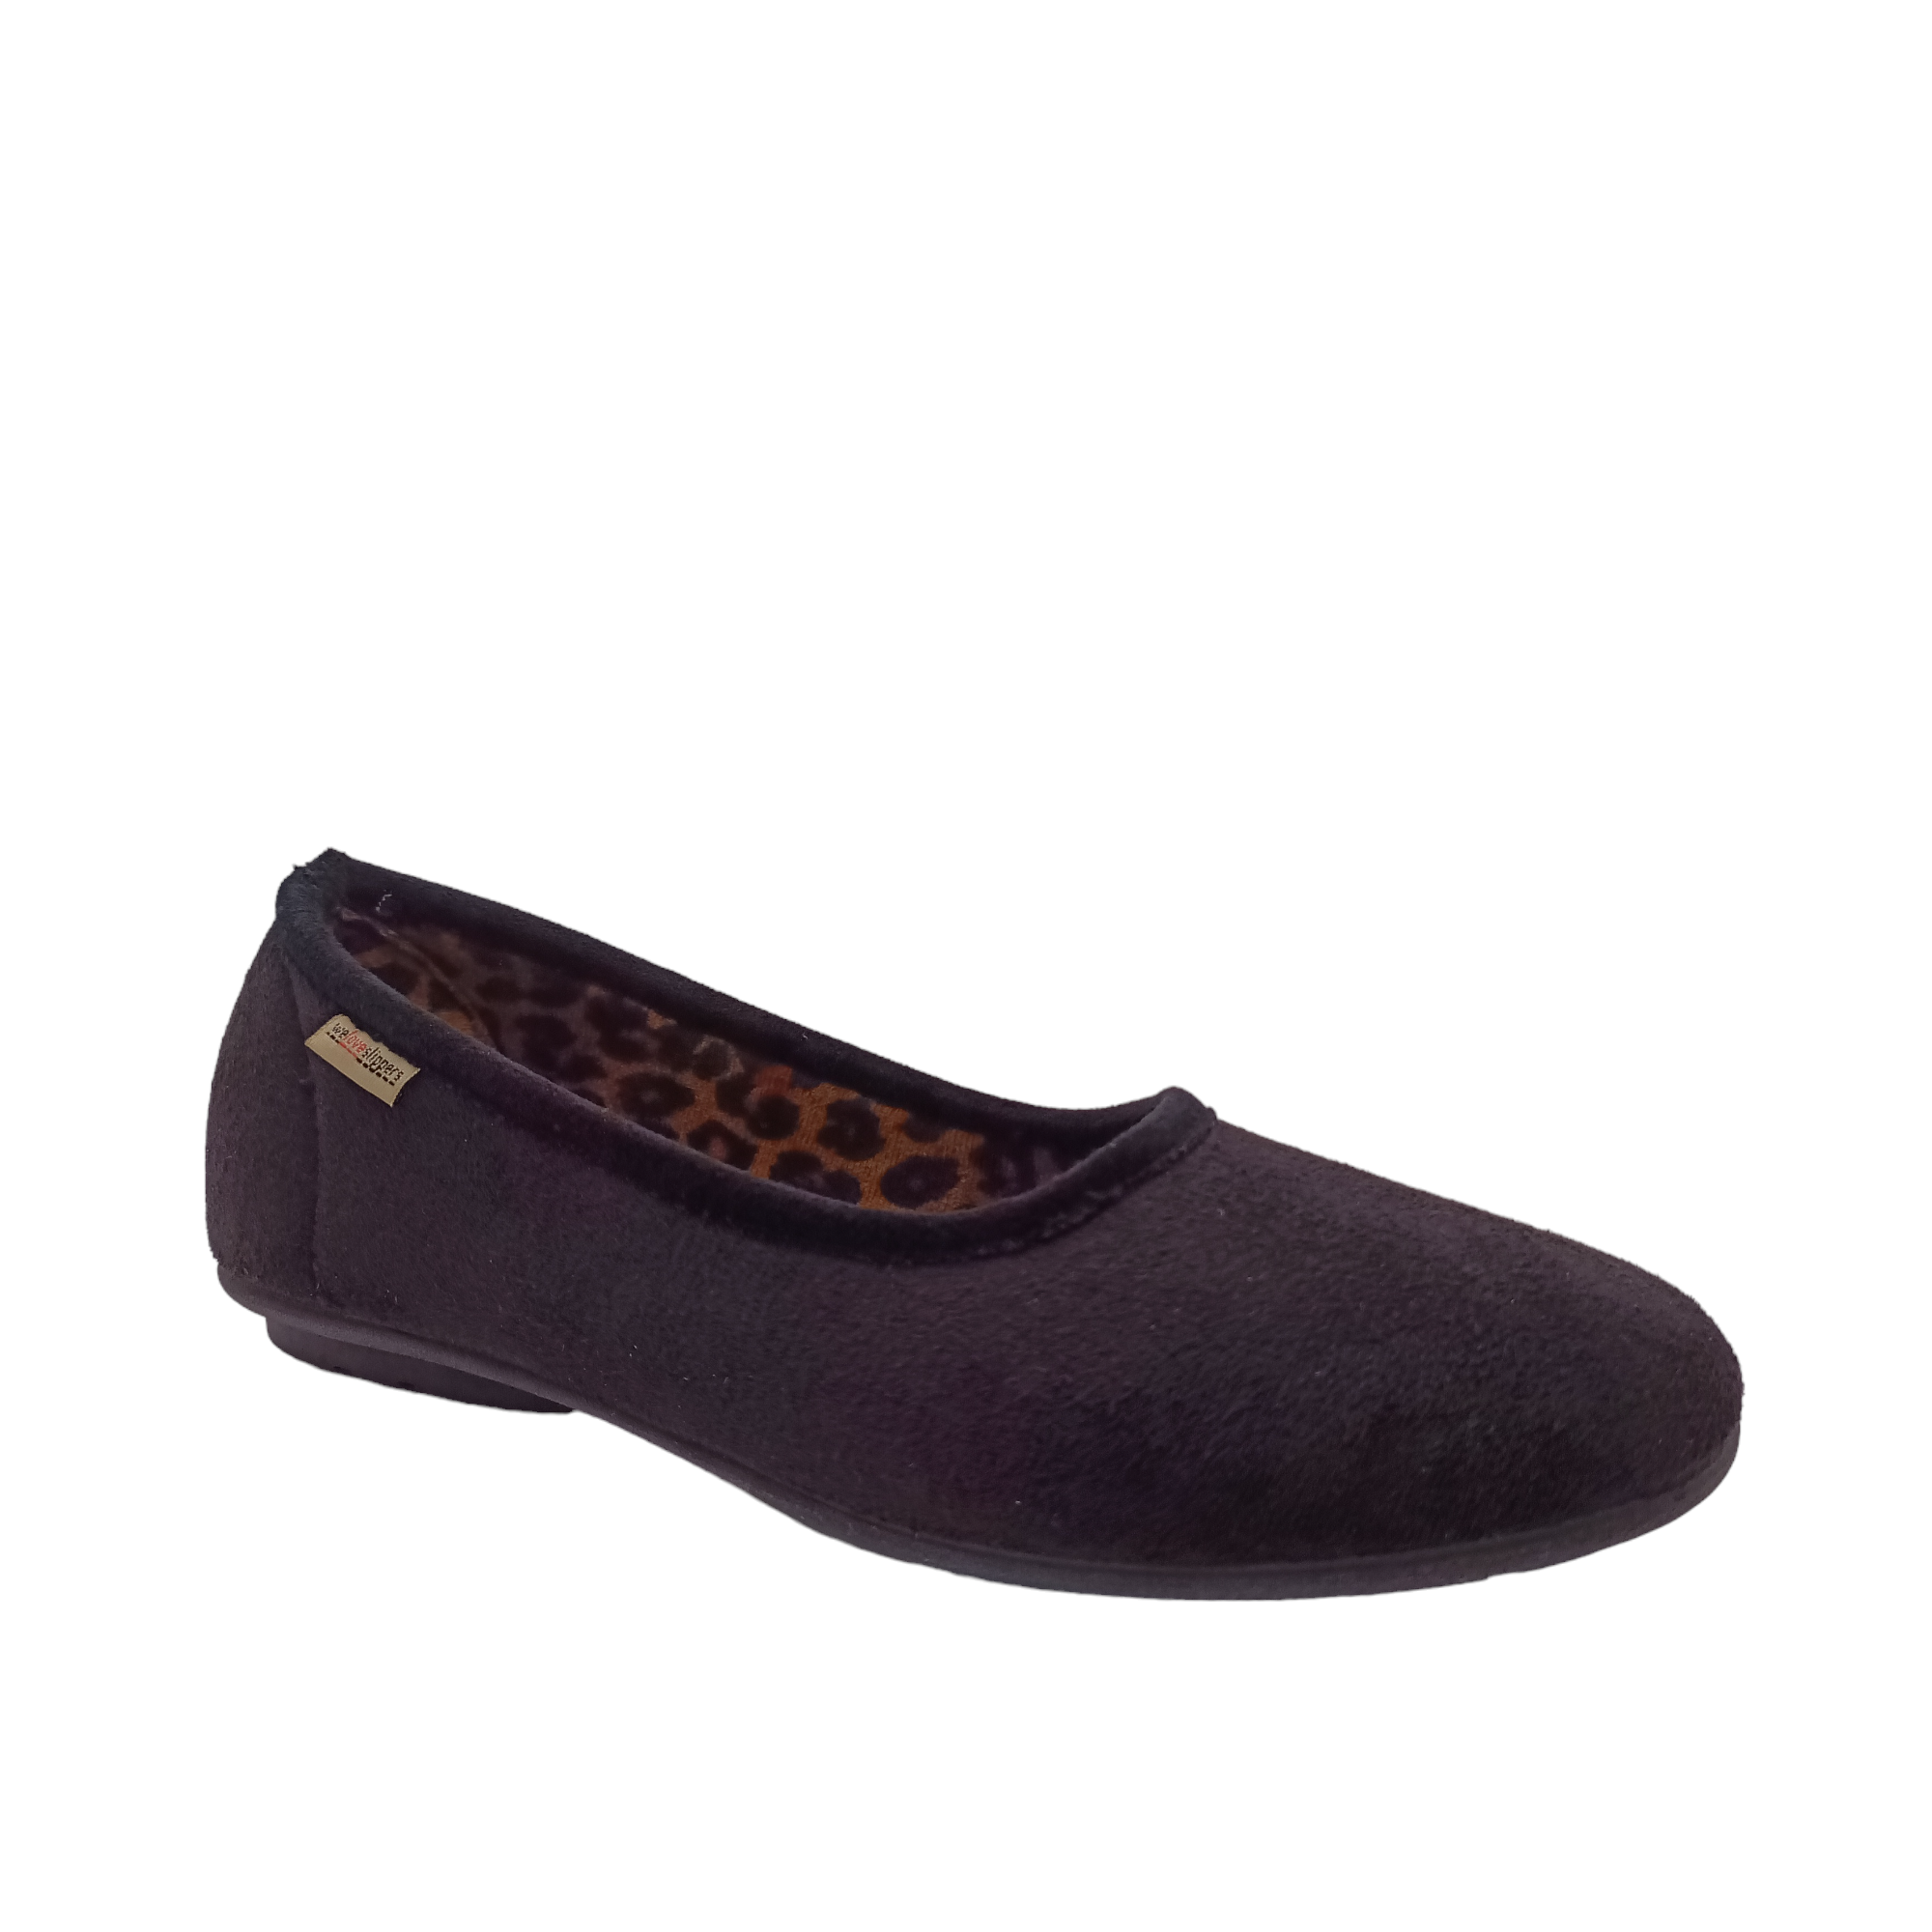 Side angle view of black Nuzzle Slippers with leopard print lining. Shop Womens Slippers and Shoes Online and In-store with shoe&amp;me.